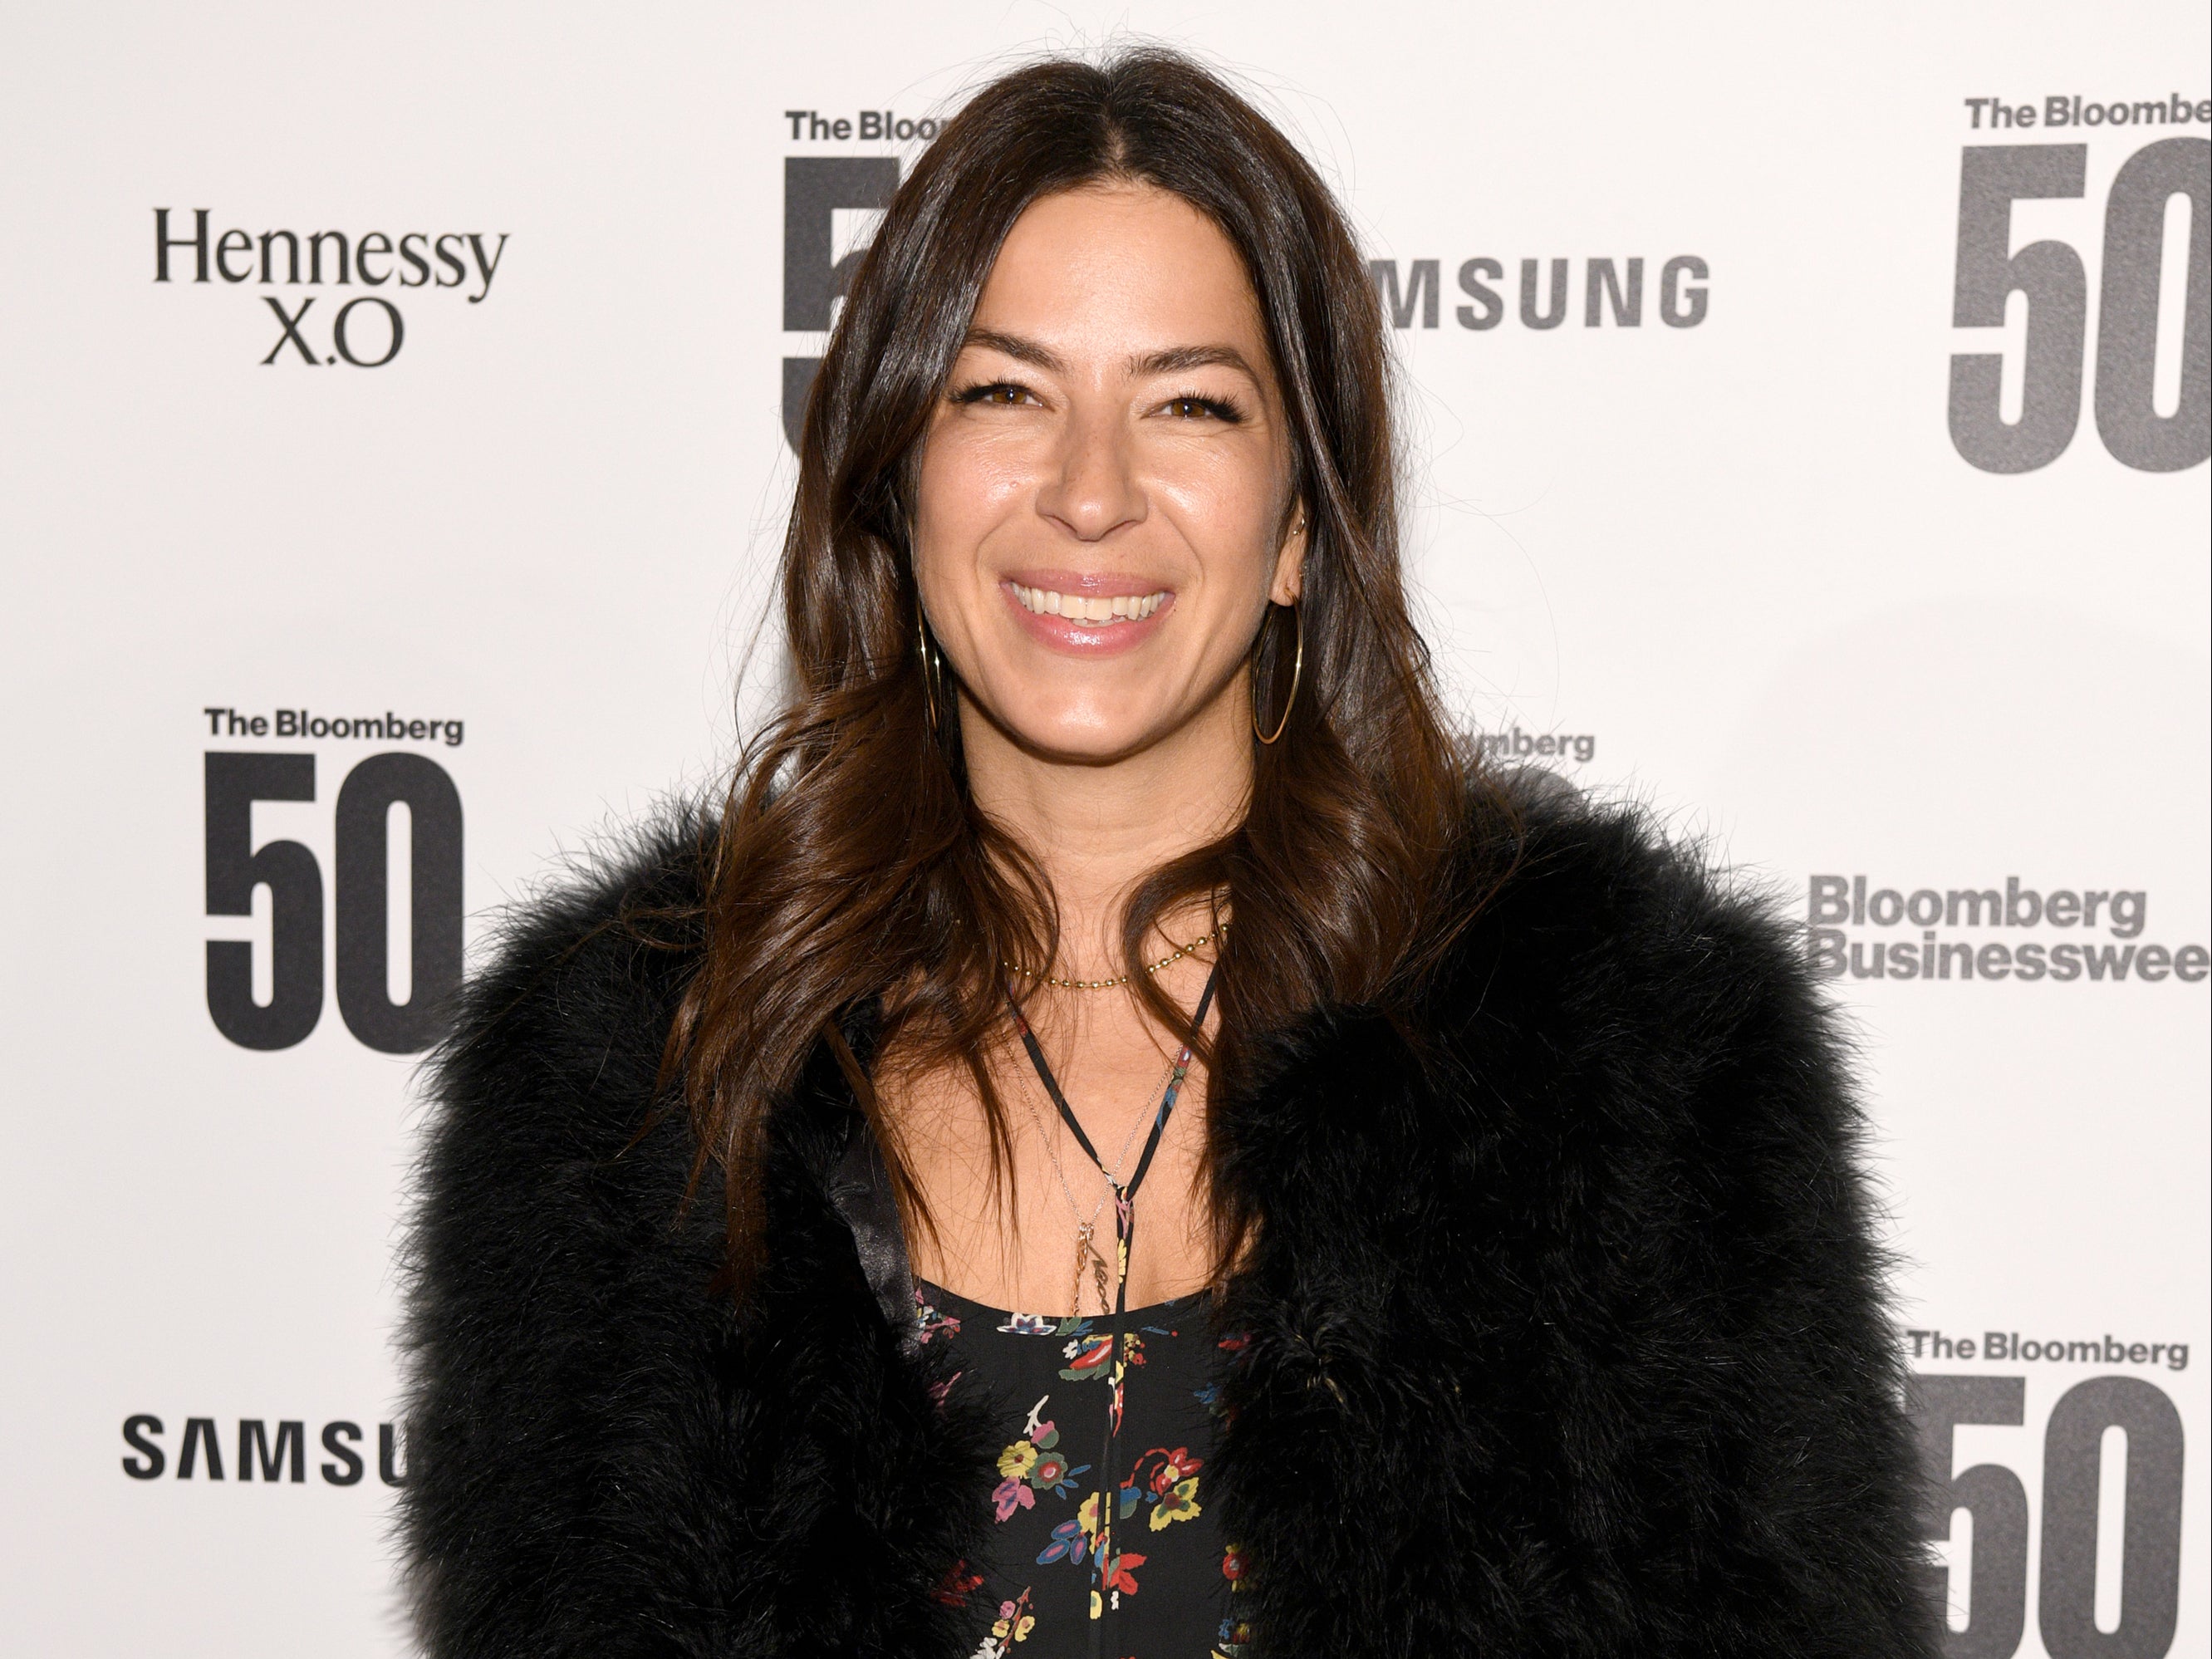 Fashion designer Rebecca Minkoff will act as mentor to the successful candidates